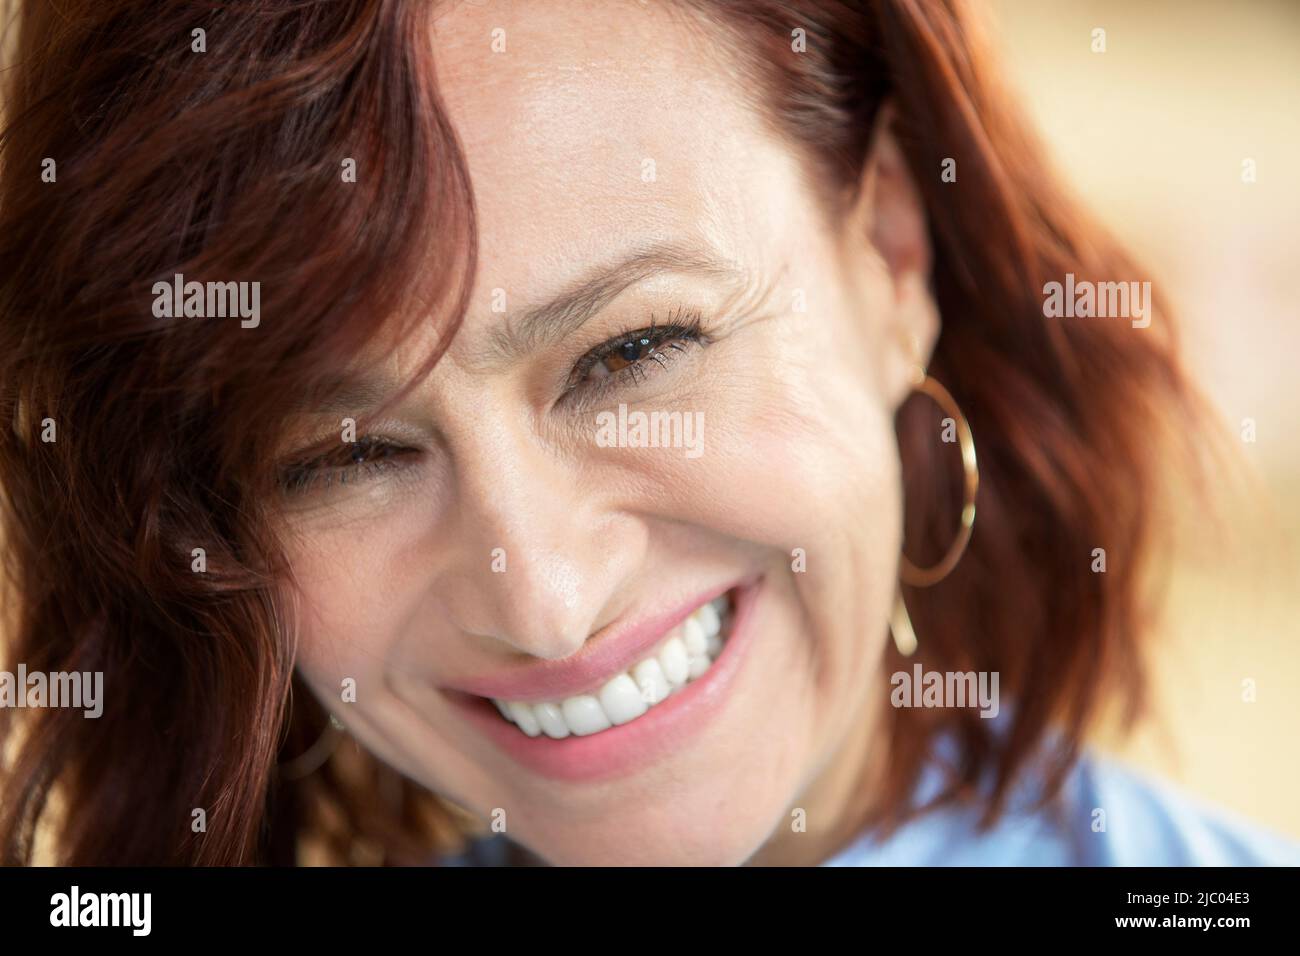 Closeup portrait of a middle-aged woman with redhead looking into camera with her chin down. Stock Photo